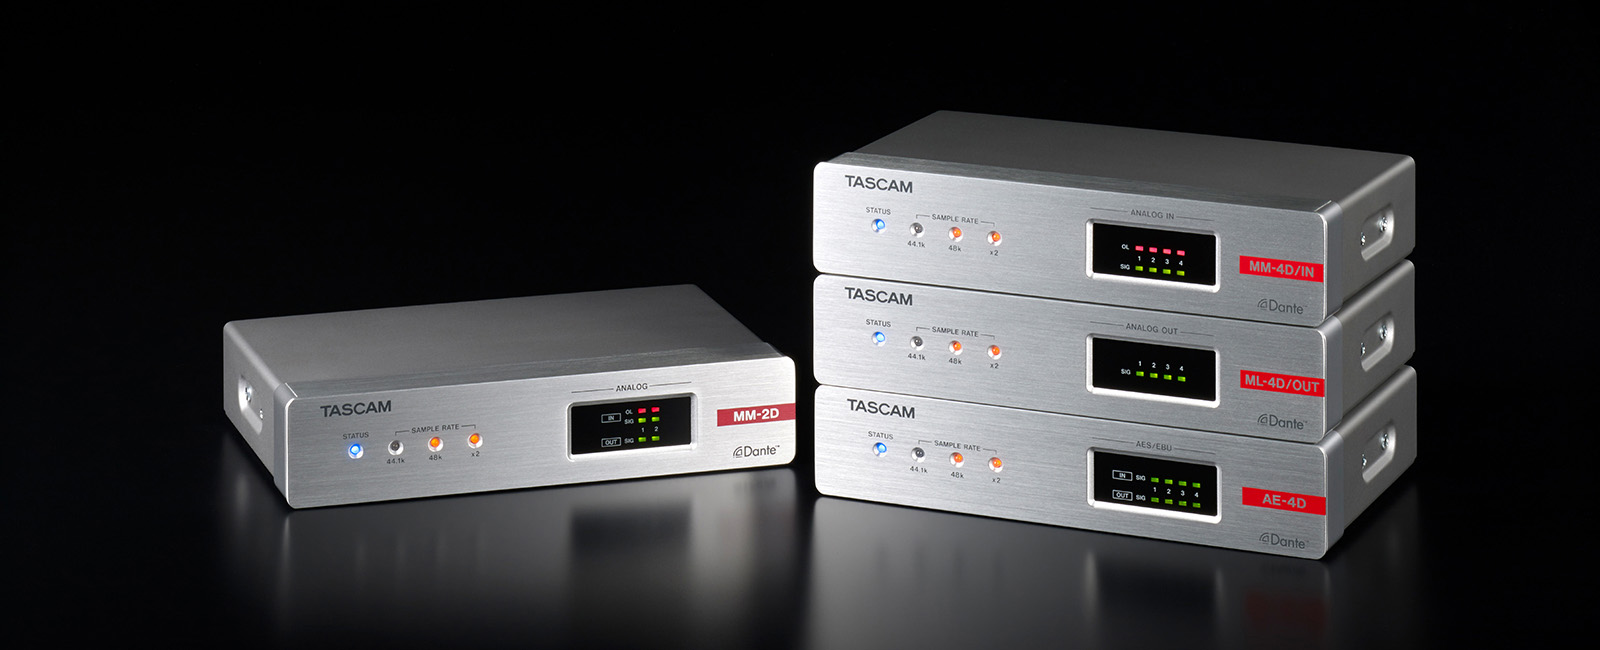 Versatile TASCAM Dante Compact Processors Perfect for a Variety of Networked Audio Applications